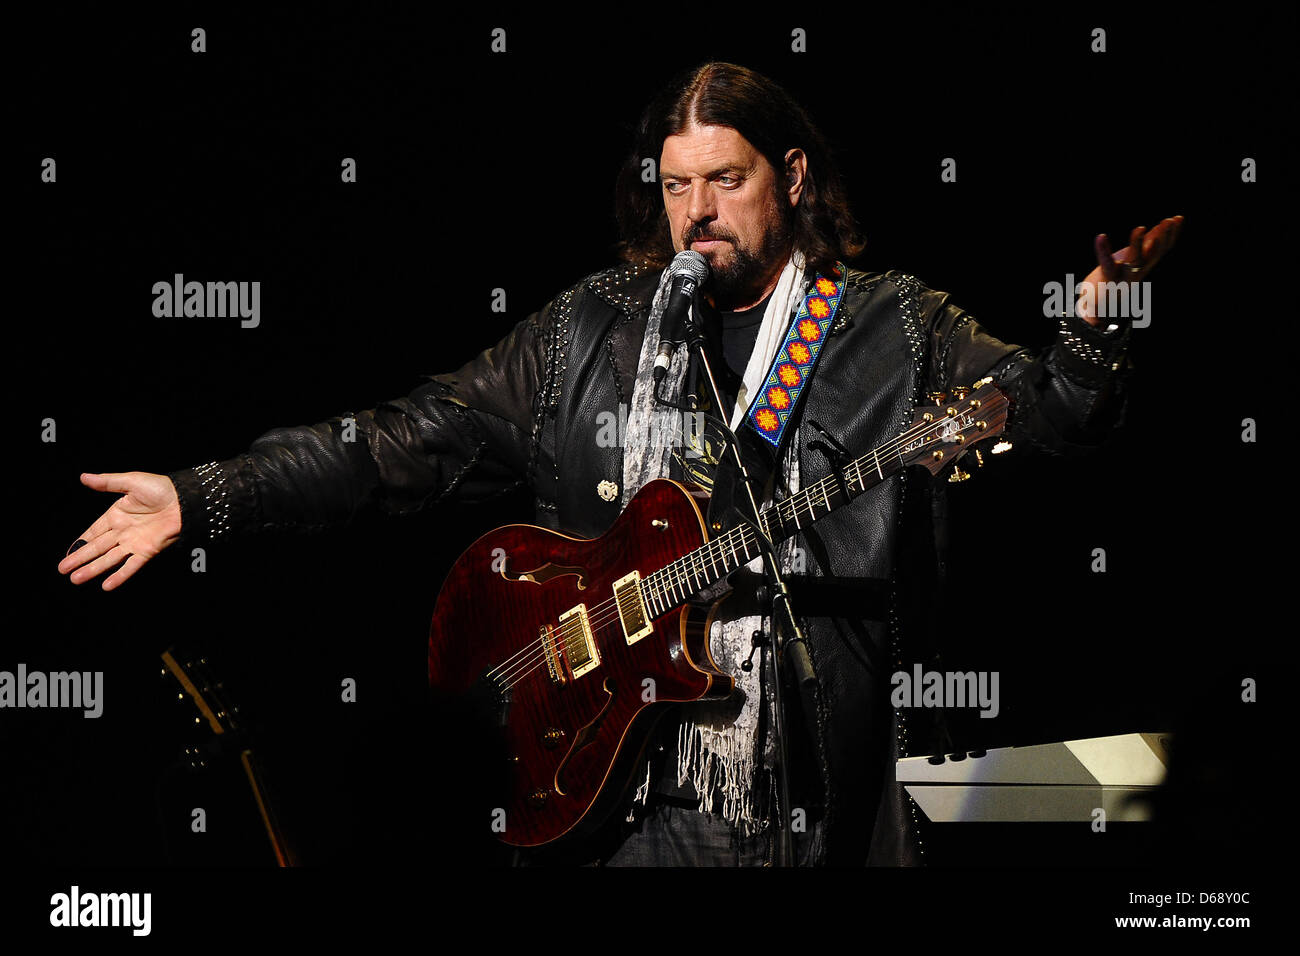 British musician and producer Alan Parsons plays his guitar during a The Alan Parsons Live Project concert at Colosseum Theater in Essen, Germany, 20 July 2012. Photo: Revierfoto Stock Photo